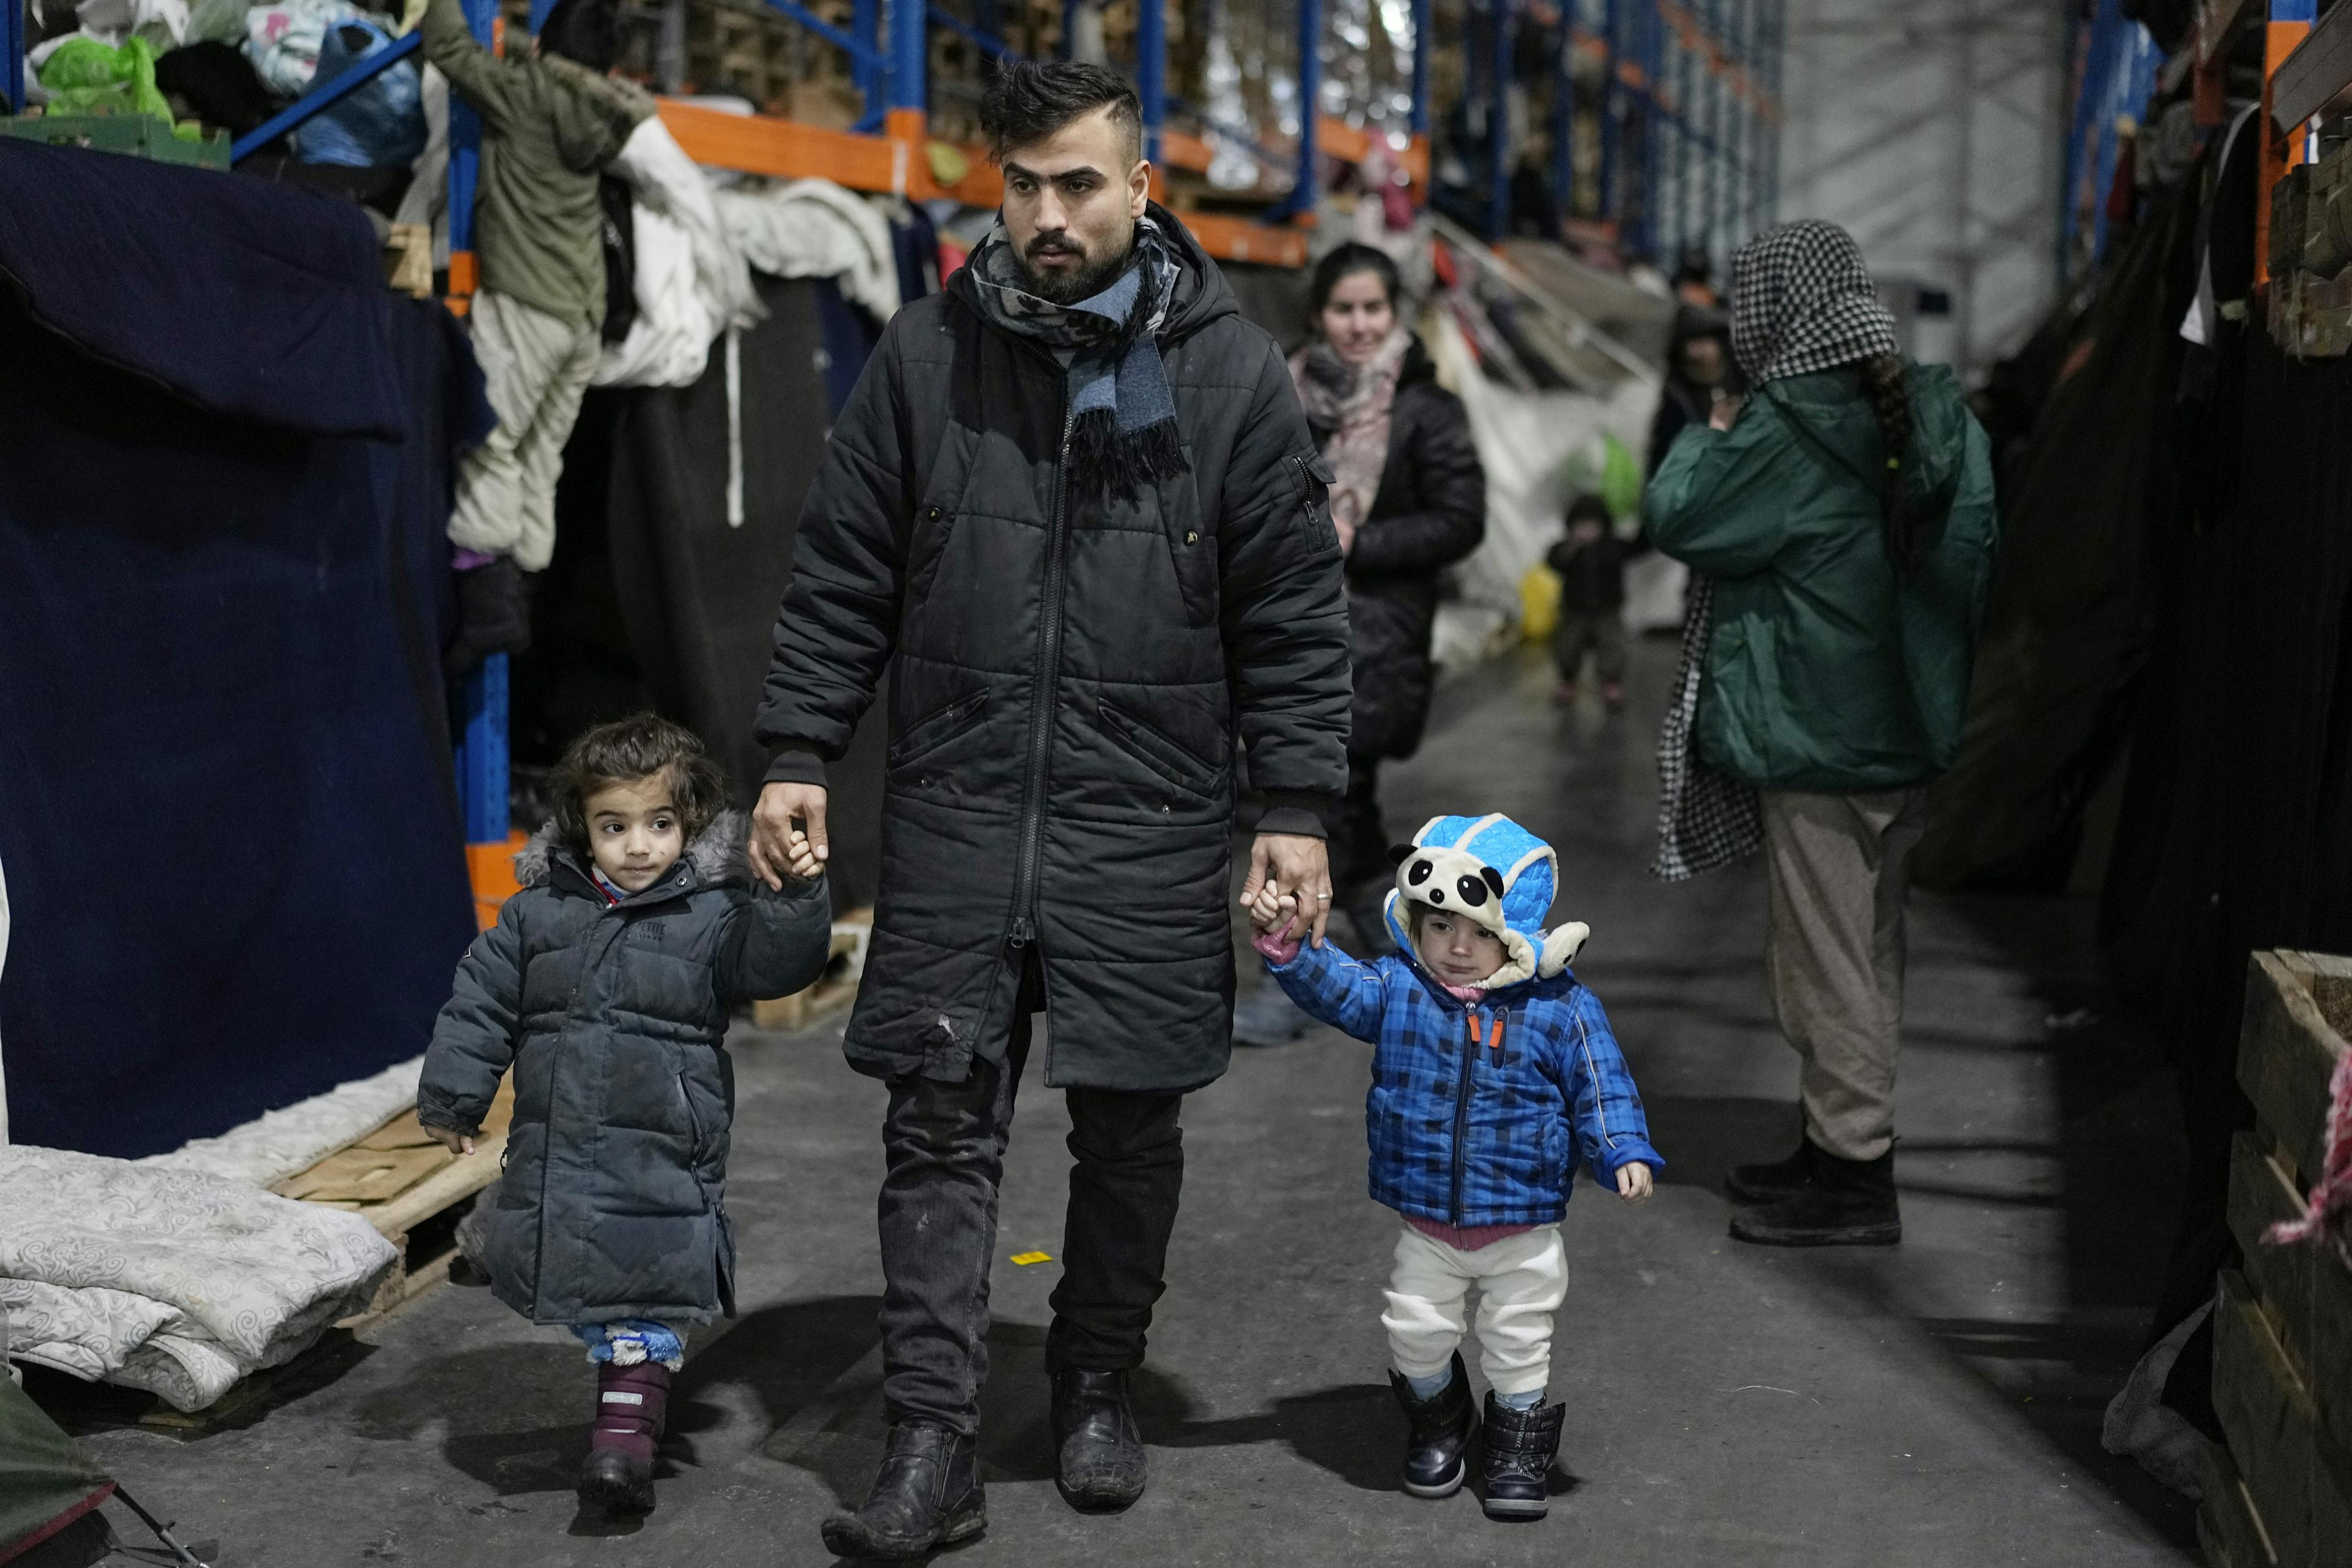 A man walks with his children as migrants settle at the checkpoint logistics center "Bruzgi" at the Belarus-Poland border near Grodno, Belarus, Thursday, Dec. 23, 2021. (AP Photo/Pavel Golovkin)